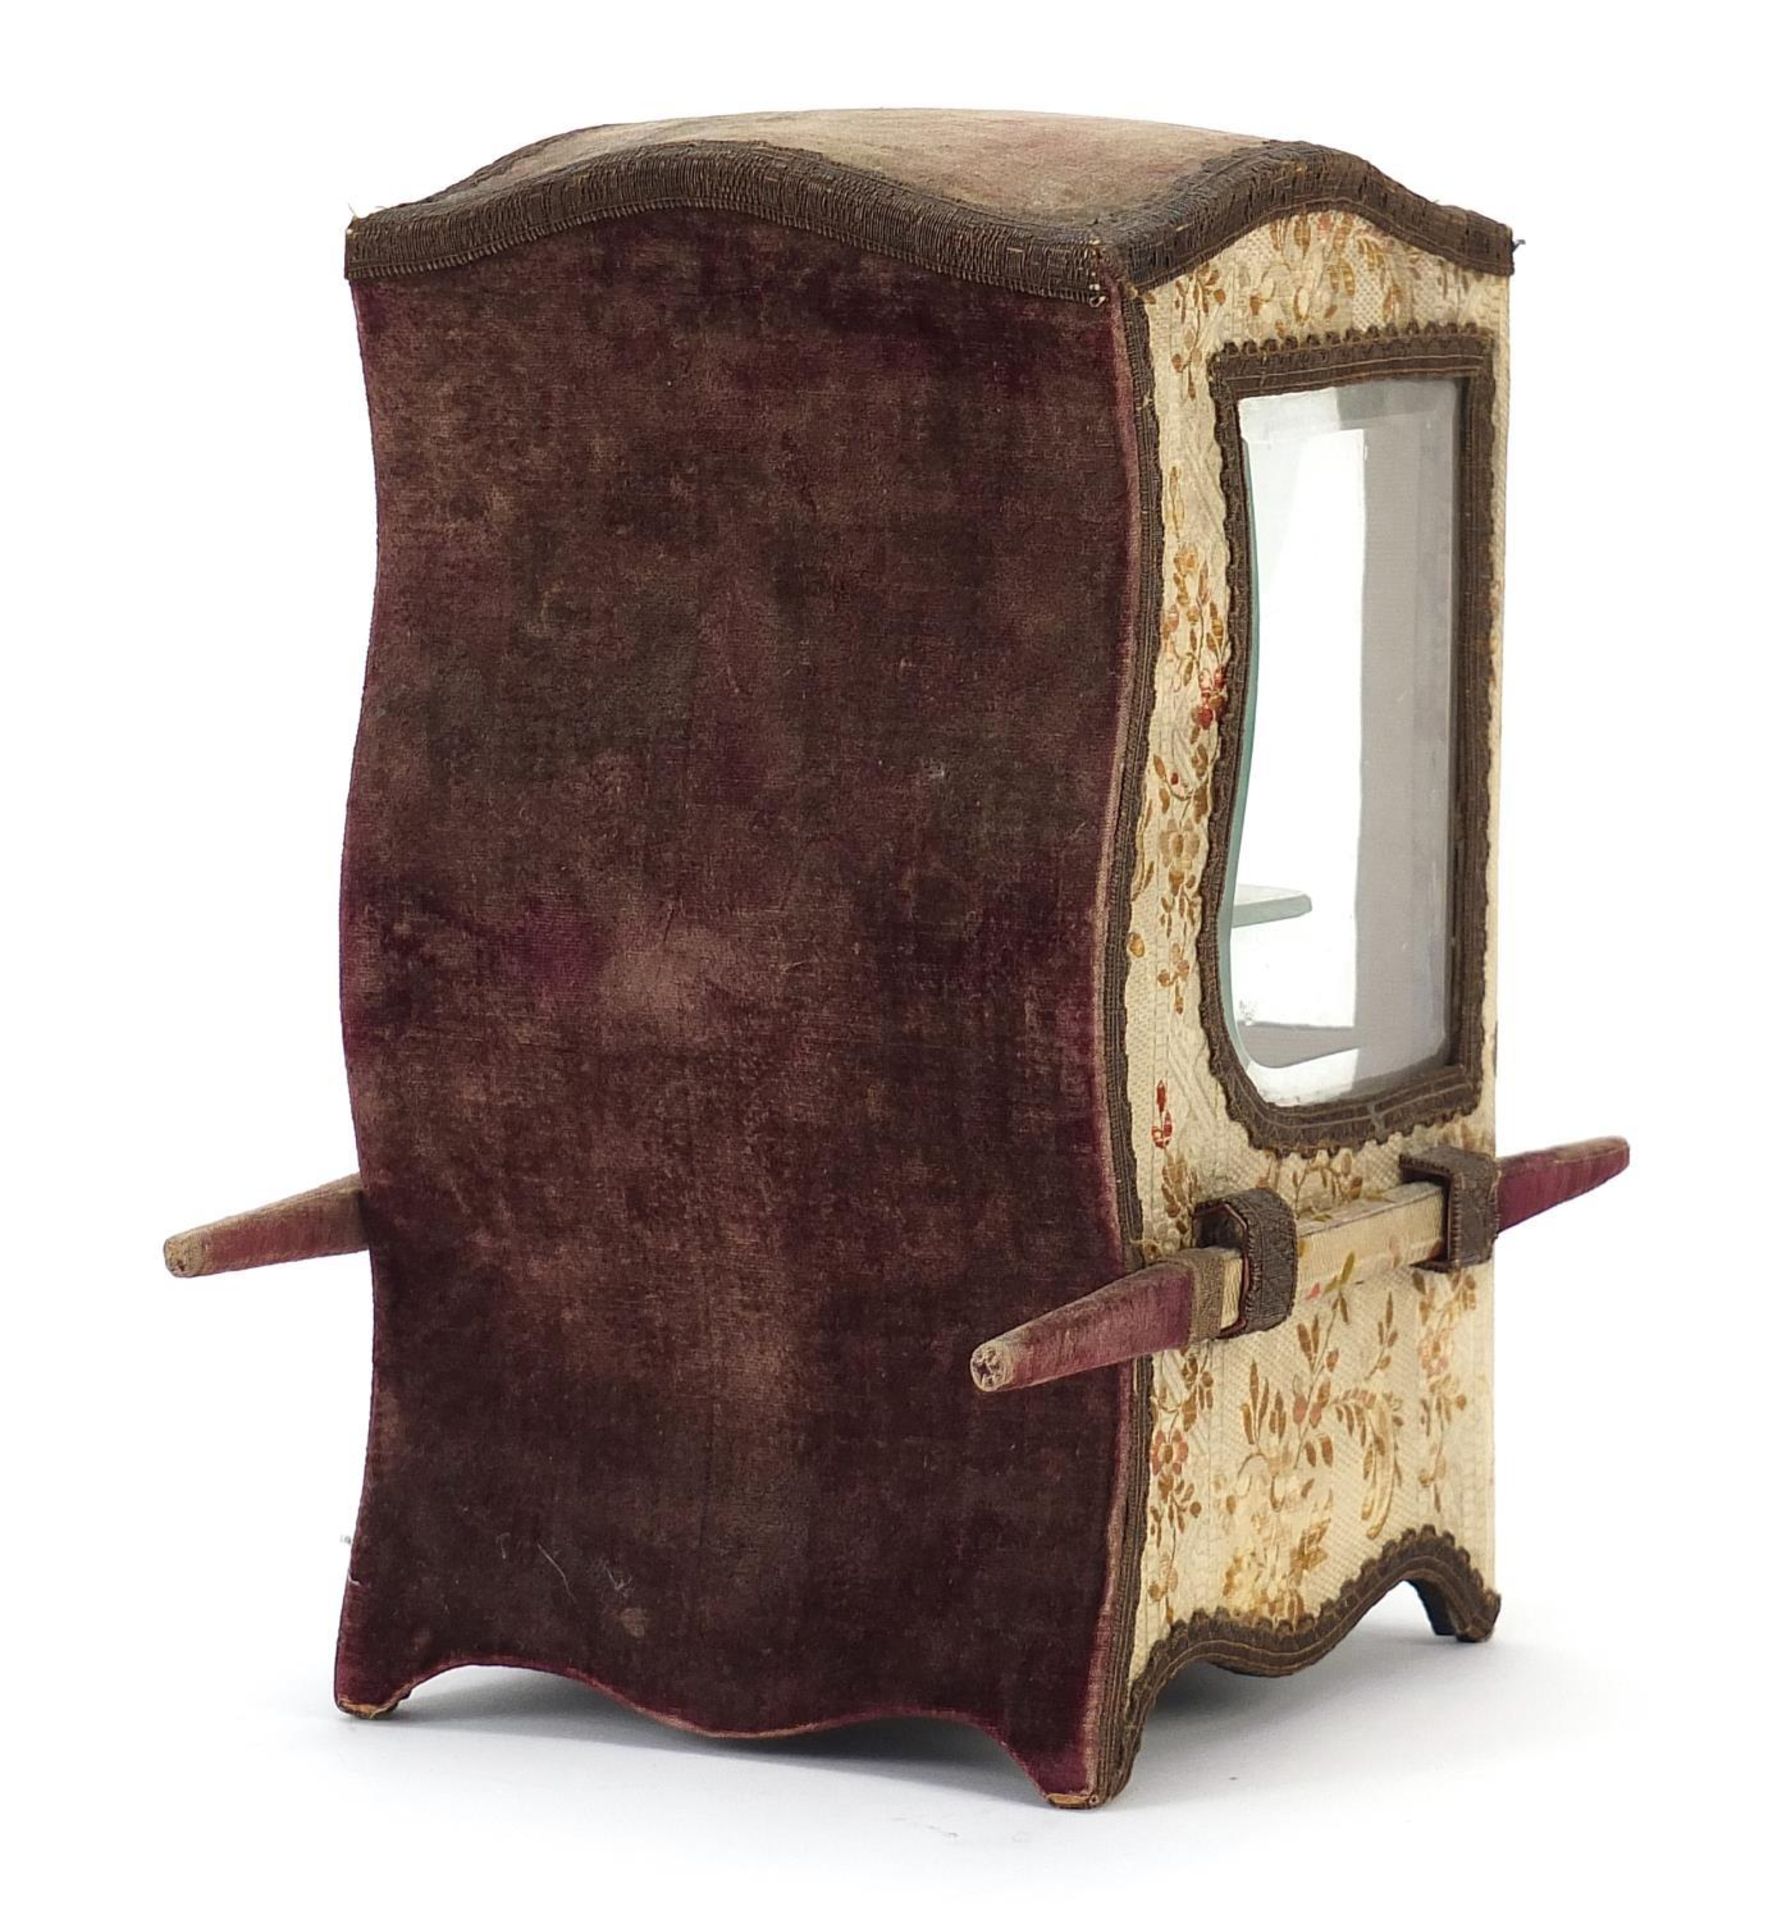 Georgian style display case of small proportions in the form of a sedan chair with bevelled glass, - Image 2 of 3